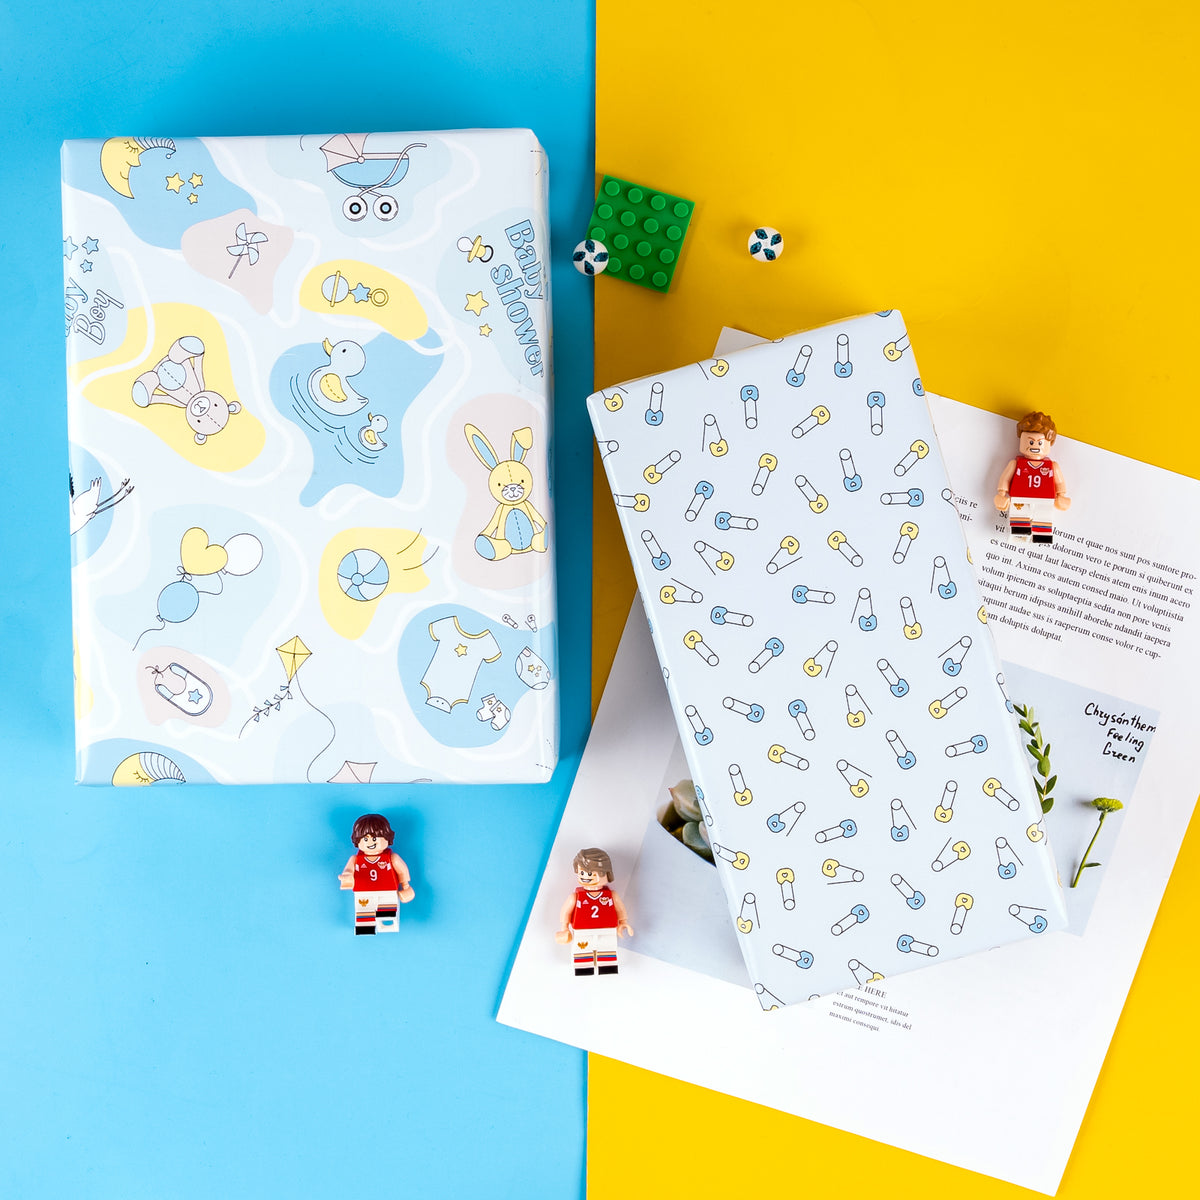 Winnie the Pooh Wrapping Paper, Baby Shower, Boy Girl, Wrap, Gift Wrap sold  by Common Caril | SKU 40409929 | 70% OFF Printerval